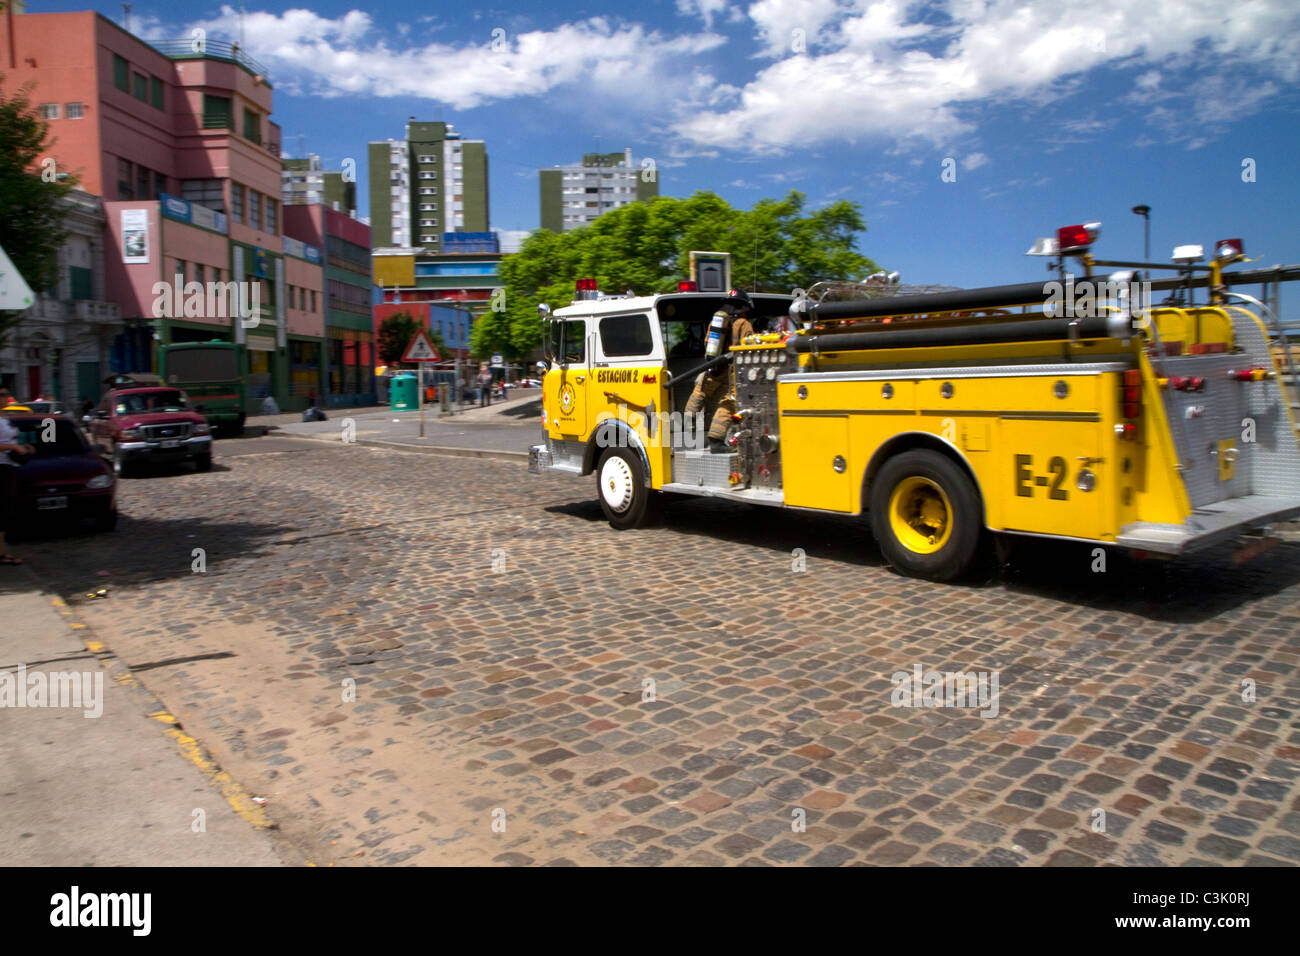 Fire truck in the La Boca barrio of Buenos Aires, Argentina. Stock Photo